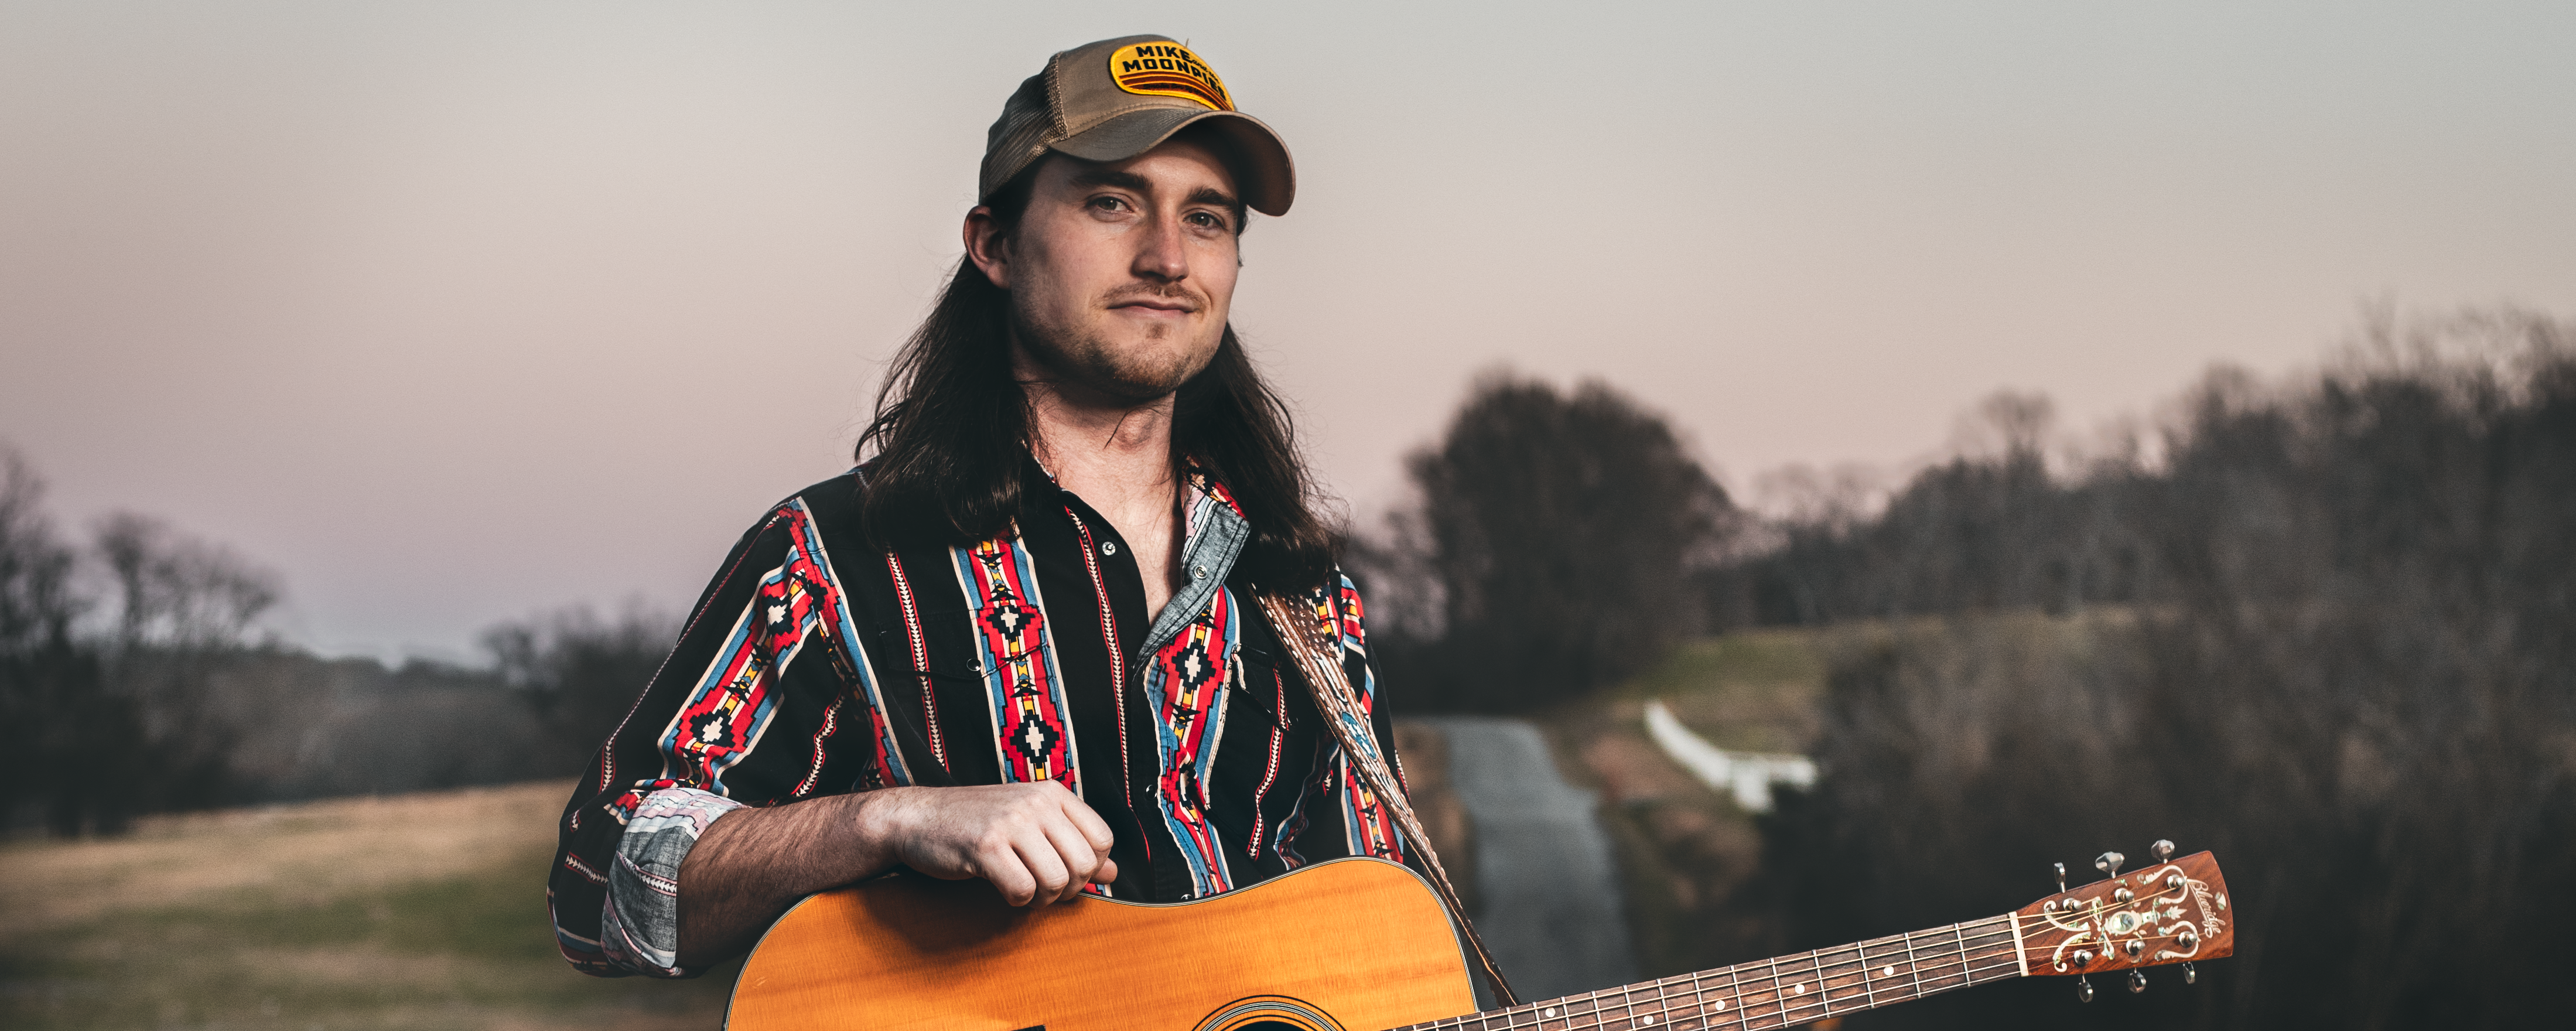 Daily Discovery: Shelby Lee Lowe Keeps Chasing His Dreams With Help From His “Stubborn Heart”